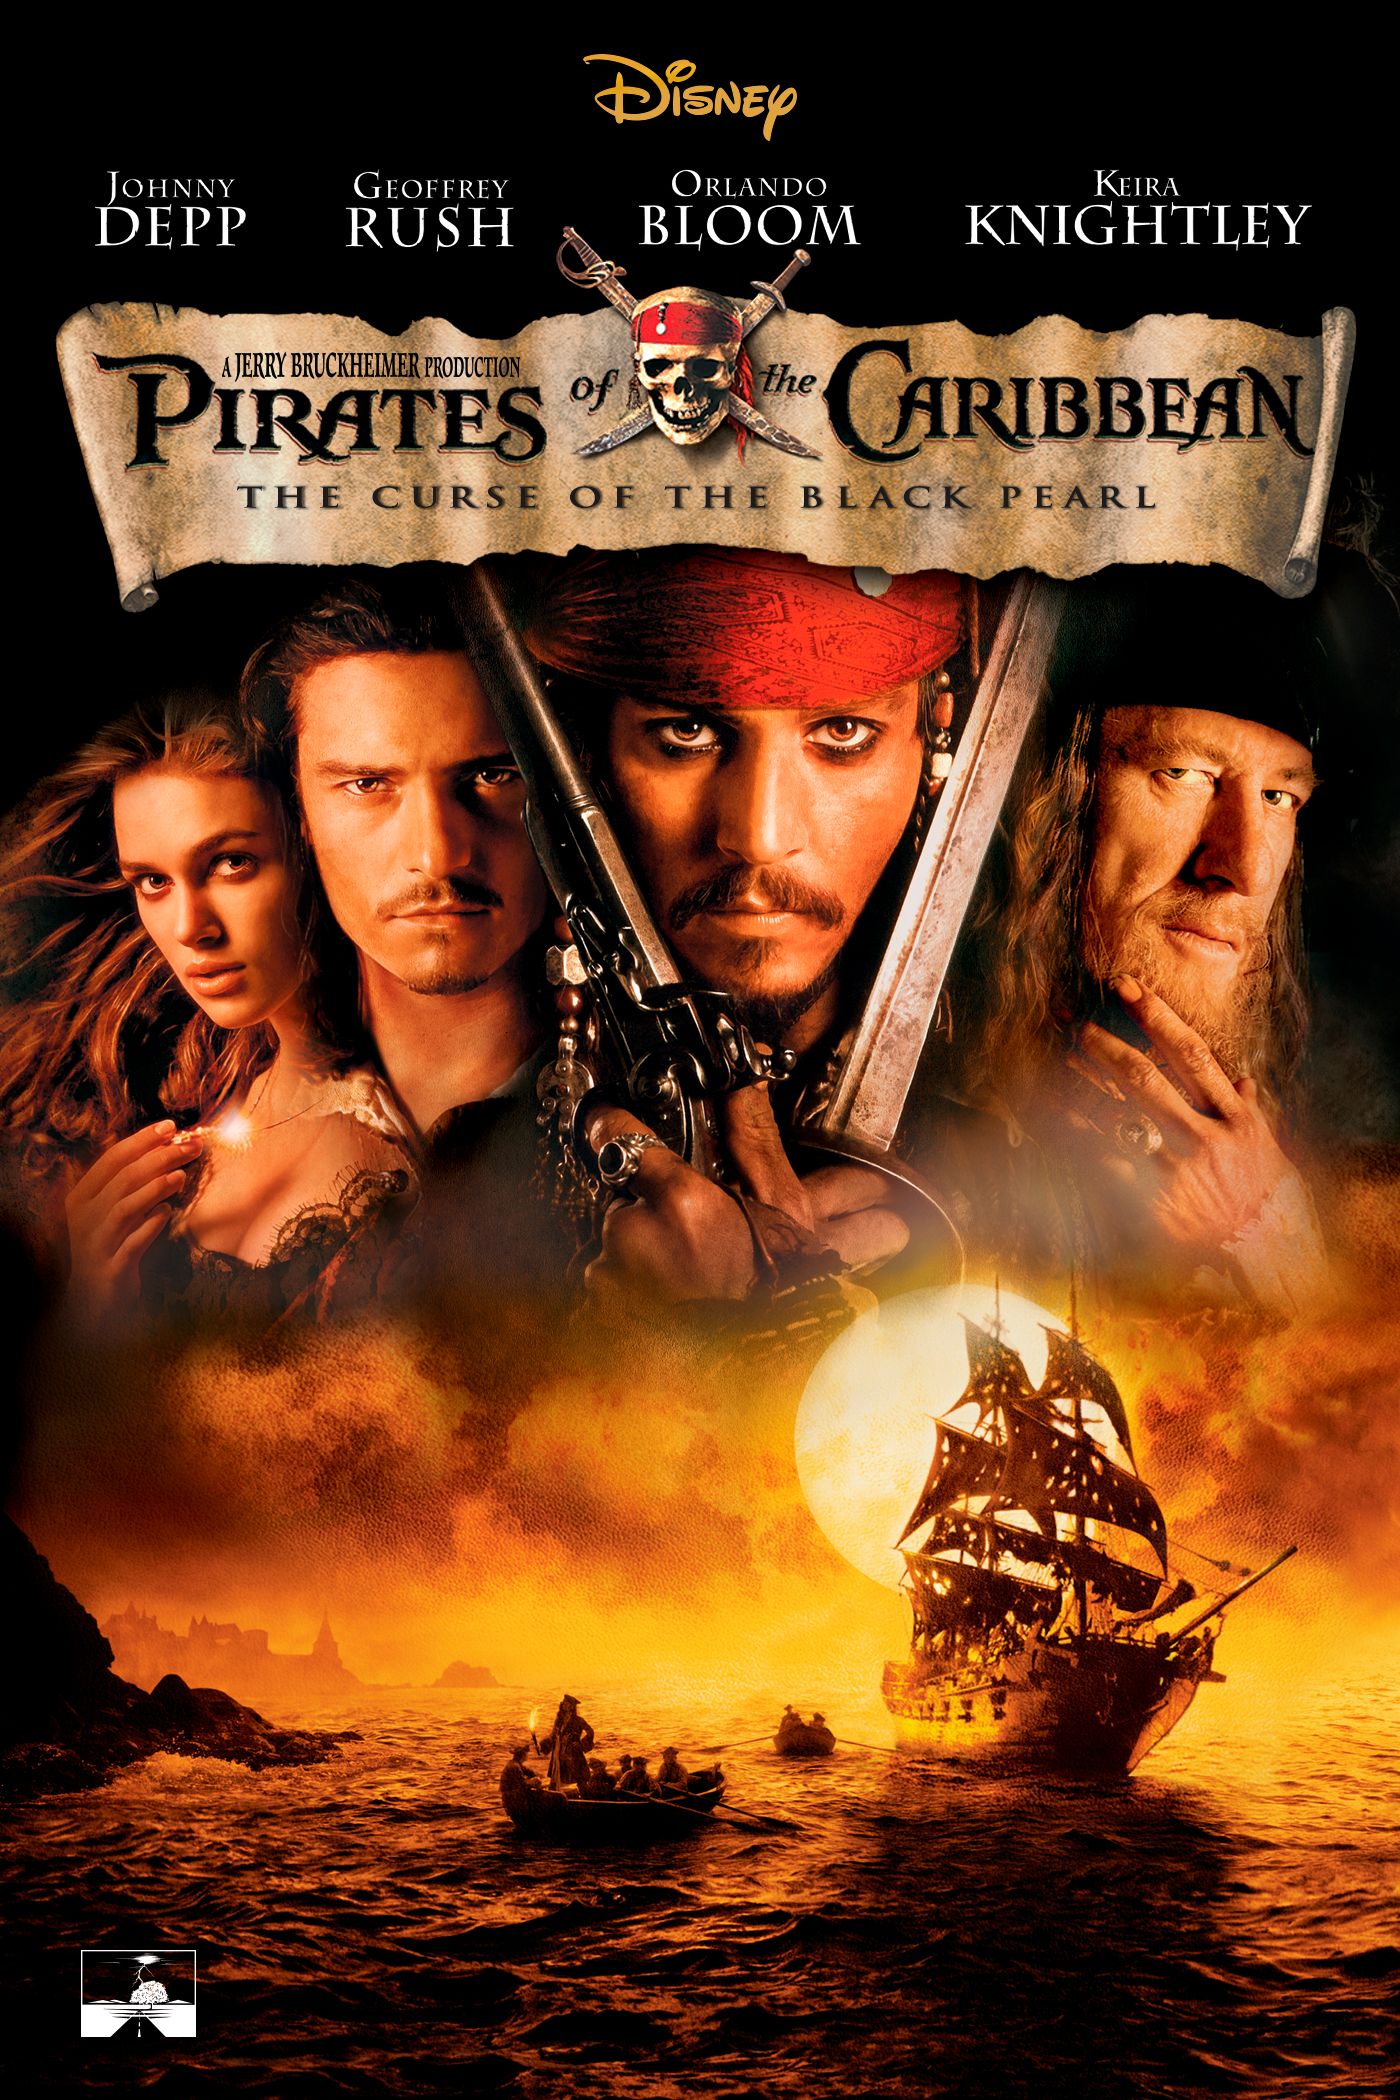 devendra chandan recommends Watch Pirates Of The Caribbean Free